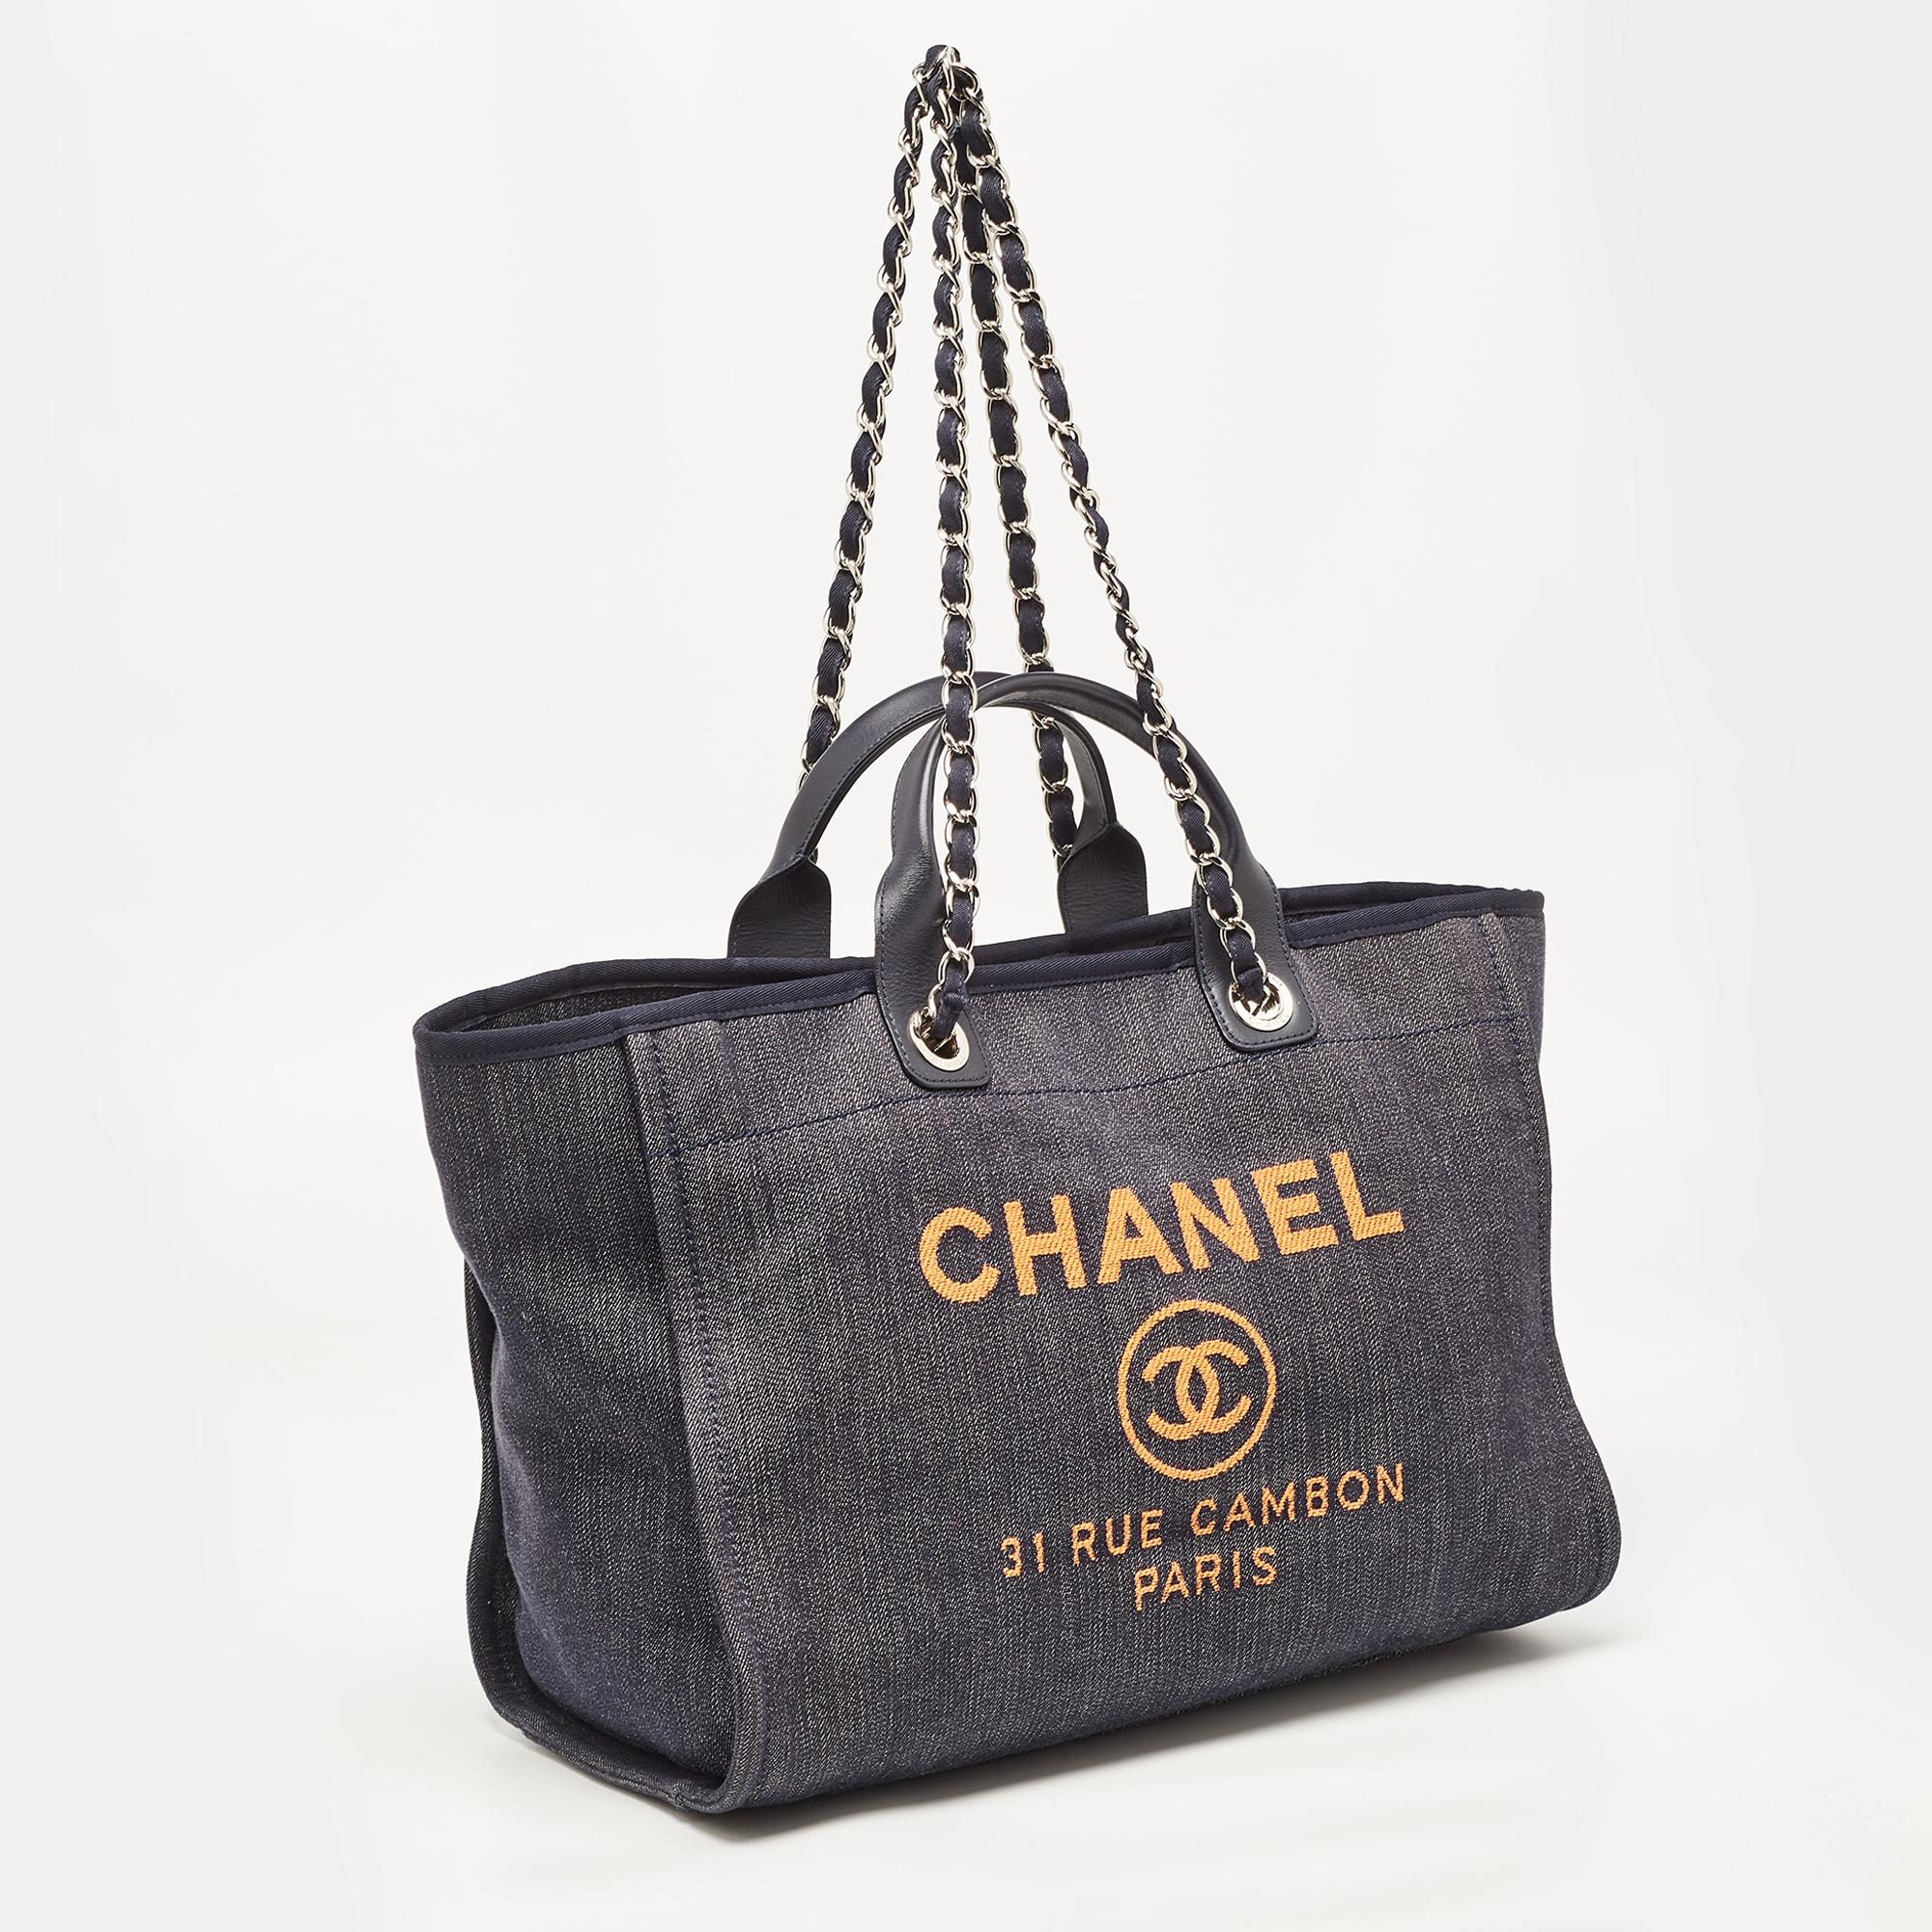 Swap that regular everyday bag with this charming Chanel Deauville shopper tote. Sewn and assembled with care and love, the bag promises to boost your style and hold your daily essentials with great ease.

